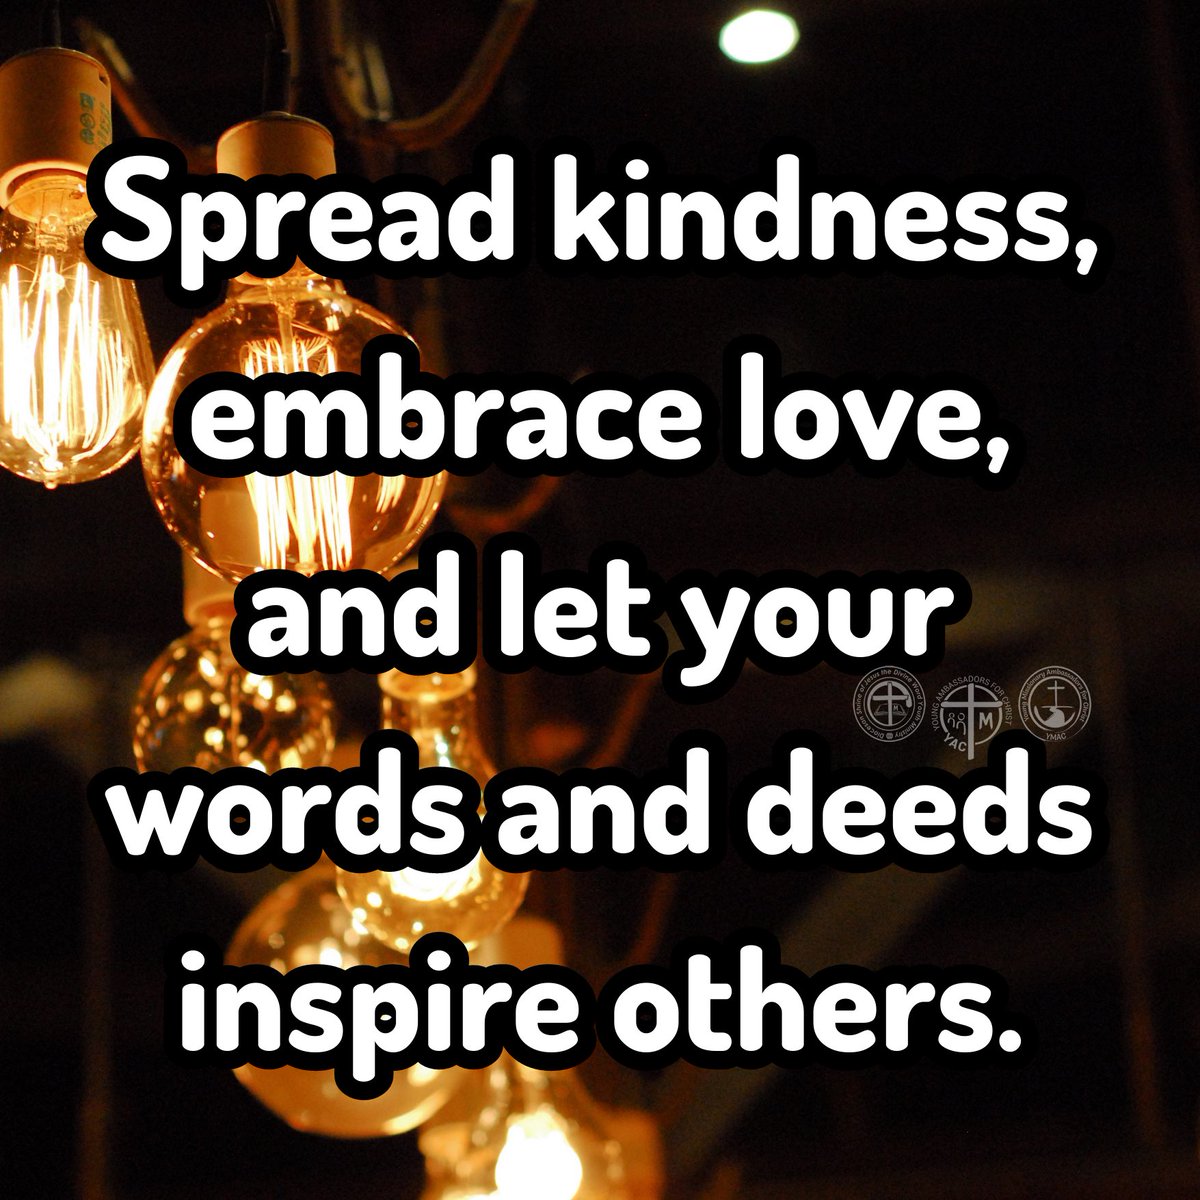 Let us take a moment to reflect on the importance of kindness and love towards those in need.

Spread kindness, embrace love, and let your words and deeds inspire others.

#ServeOthers #HeartFullOfLove
#KindnessMatters #SpreadLove
***
#YAC #YMAC #SYM 
#SVDyouth #ShrineYouth